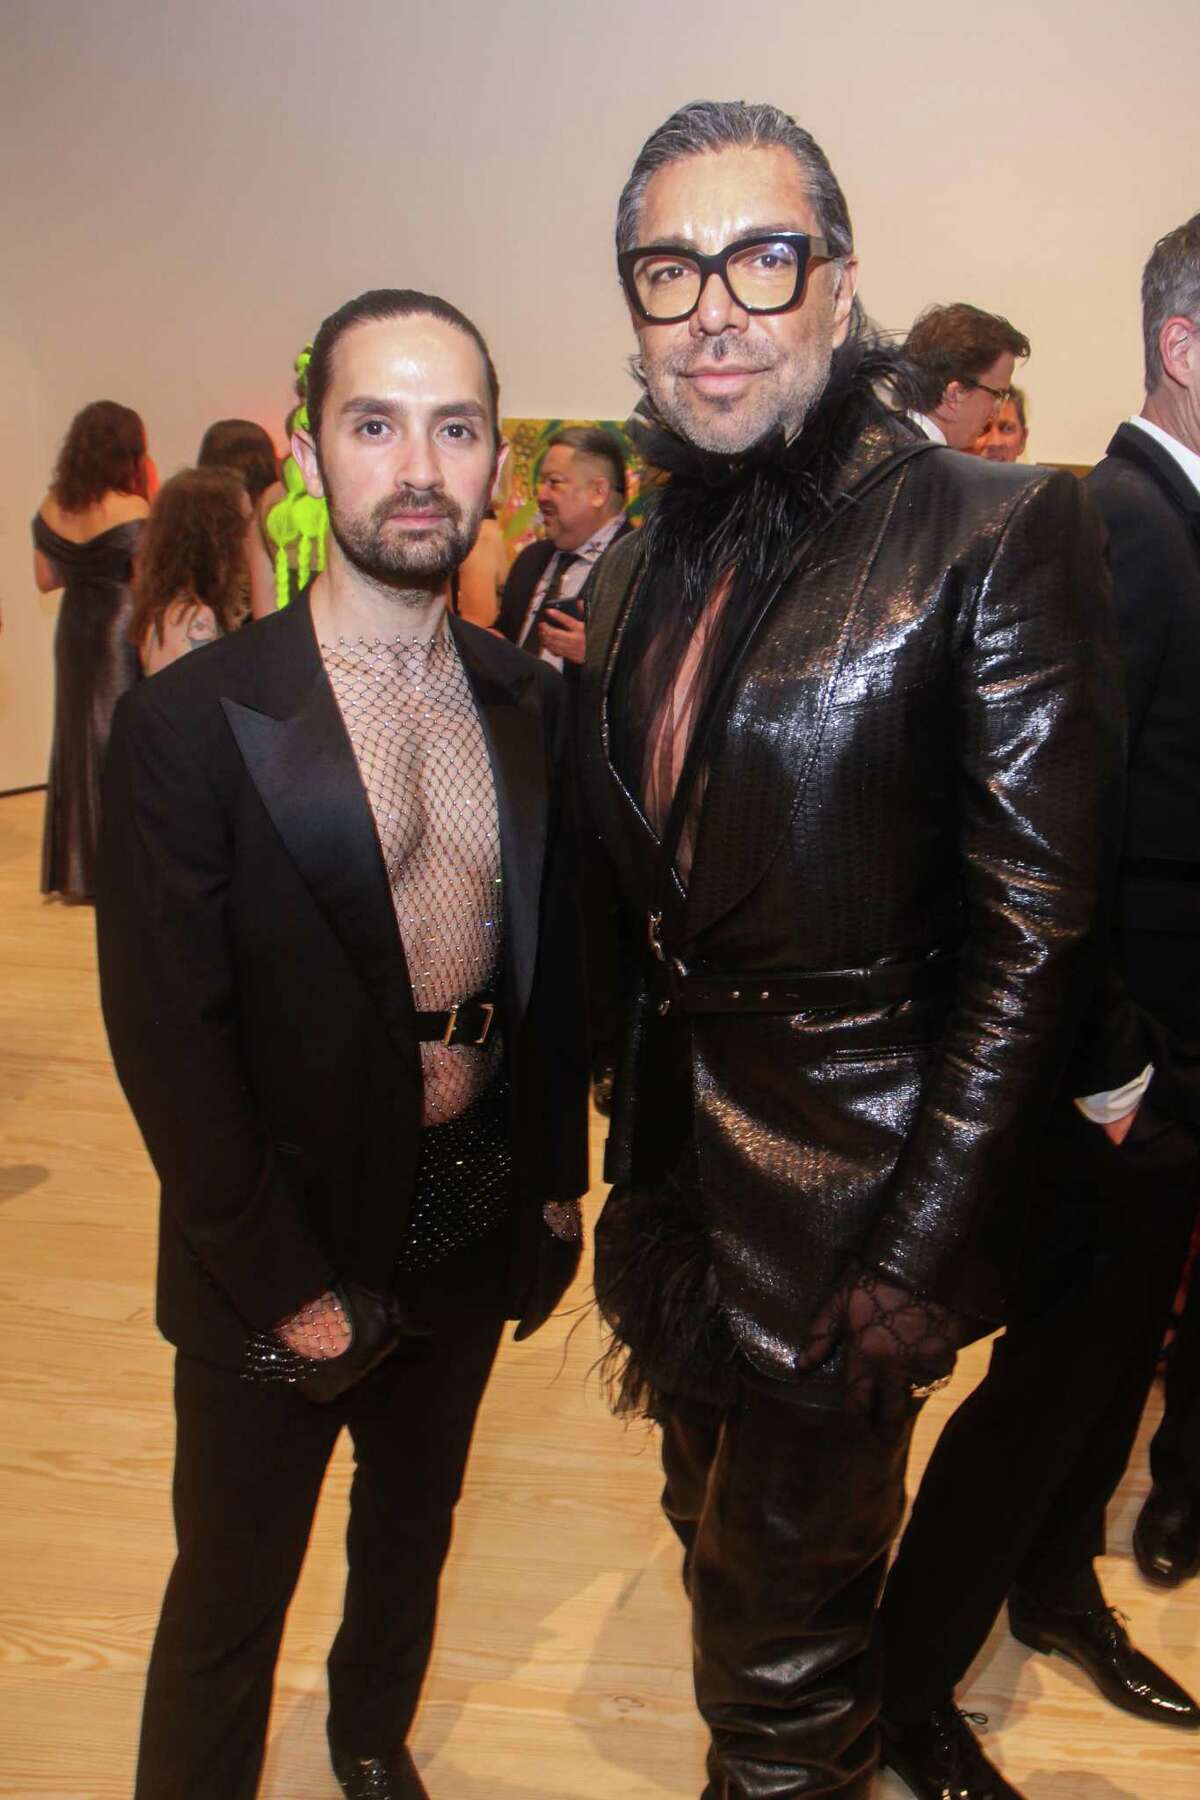 Tarek Bjeirmi, left, and Ceron at Contemporary Arts Museum Houston recreation of a Berlin nightclub for this year's "Underground" themed gala in Houston on April 30, 2022.